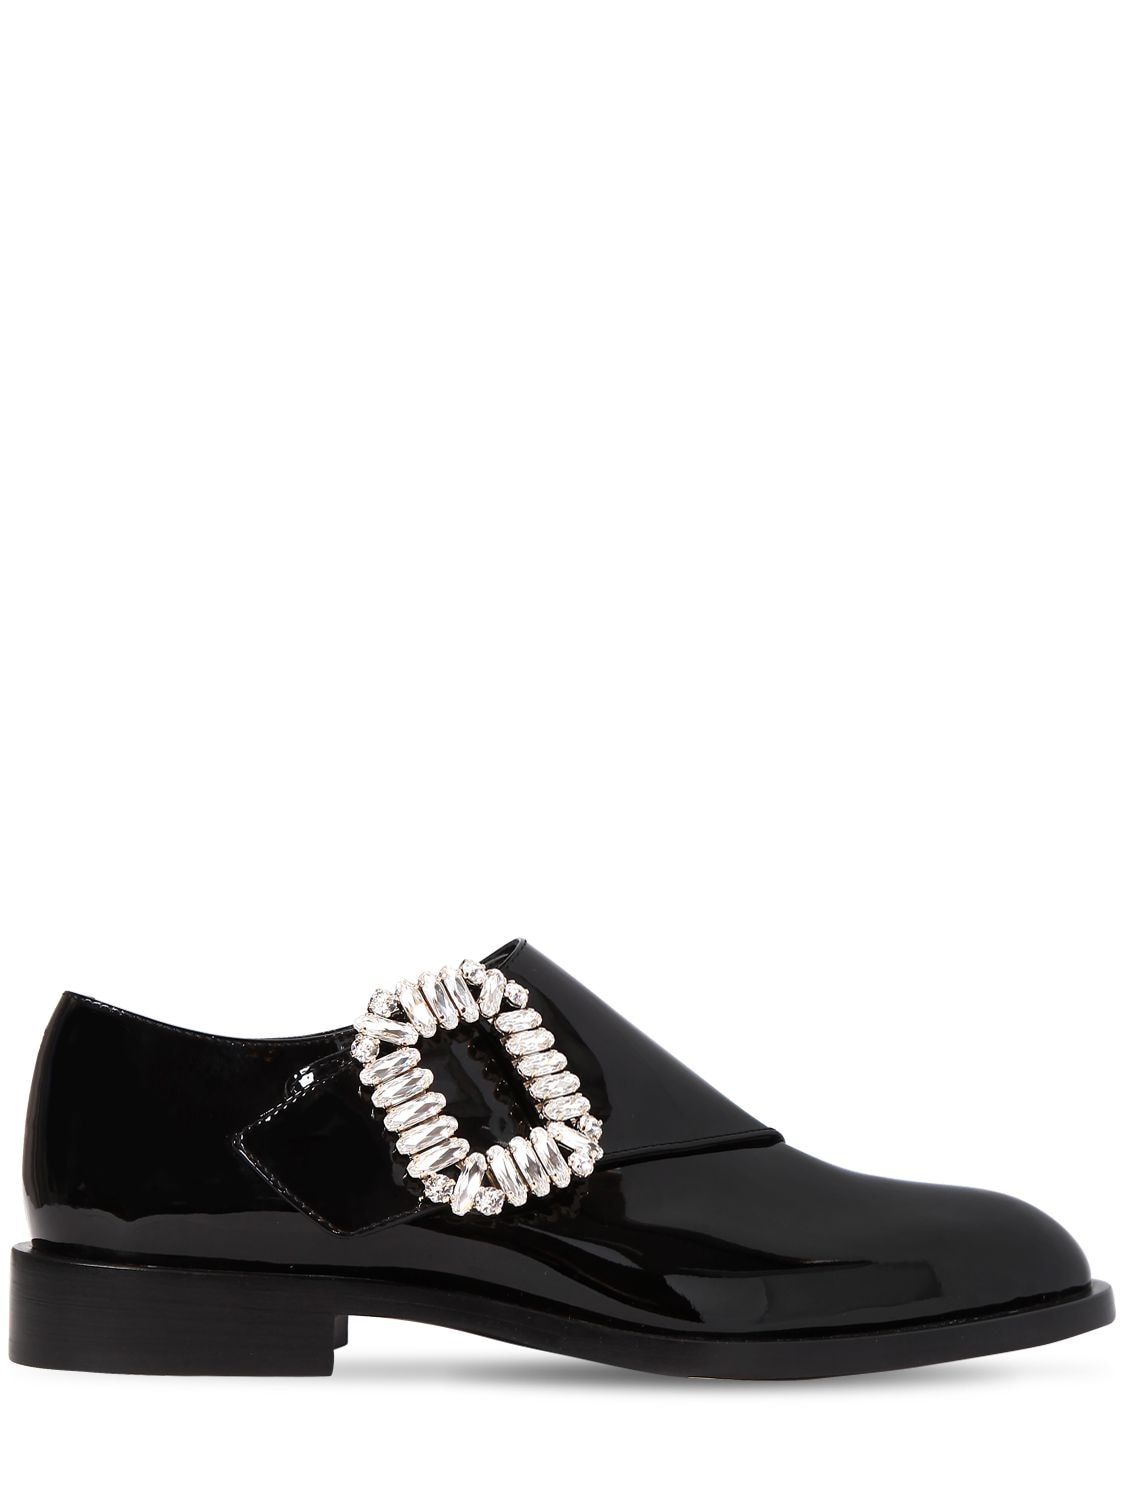 Roger Vivier 30mm Monk Strap Patent Leather Shoes In Black